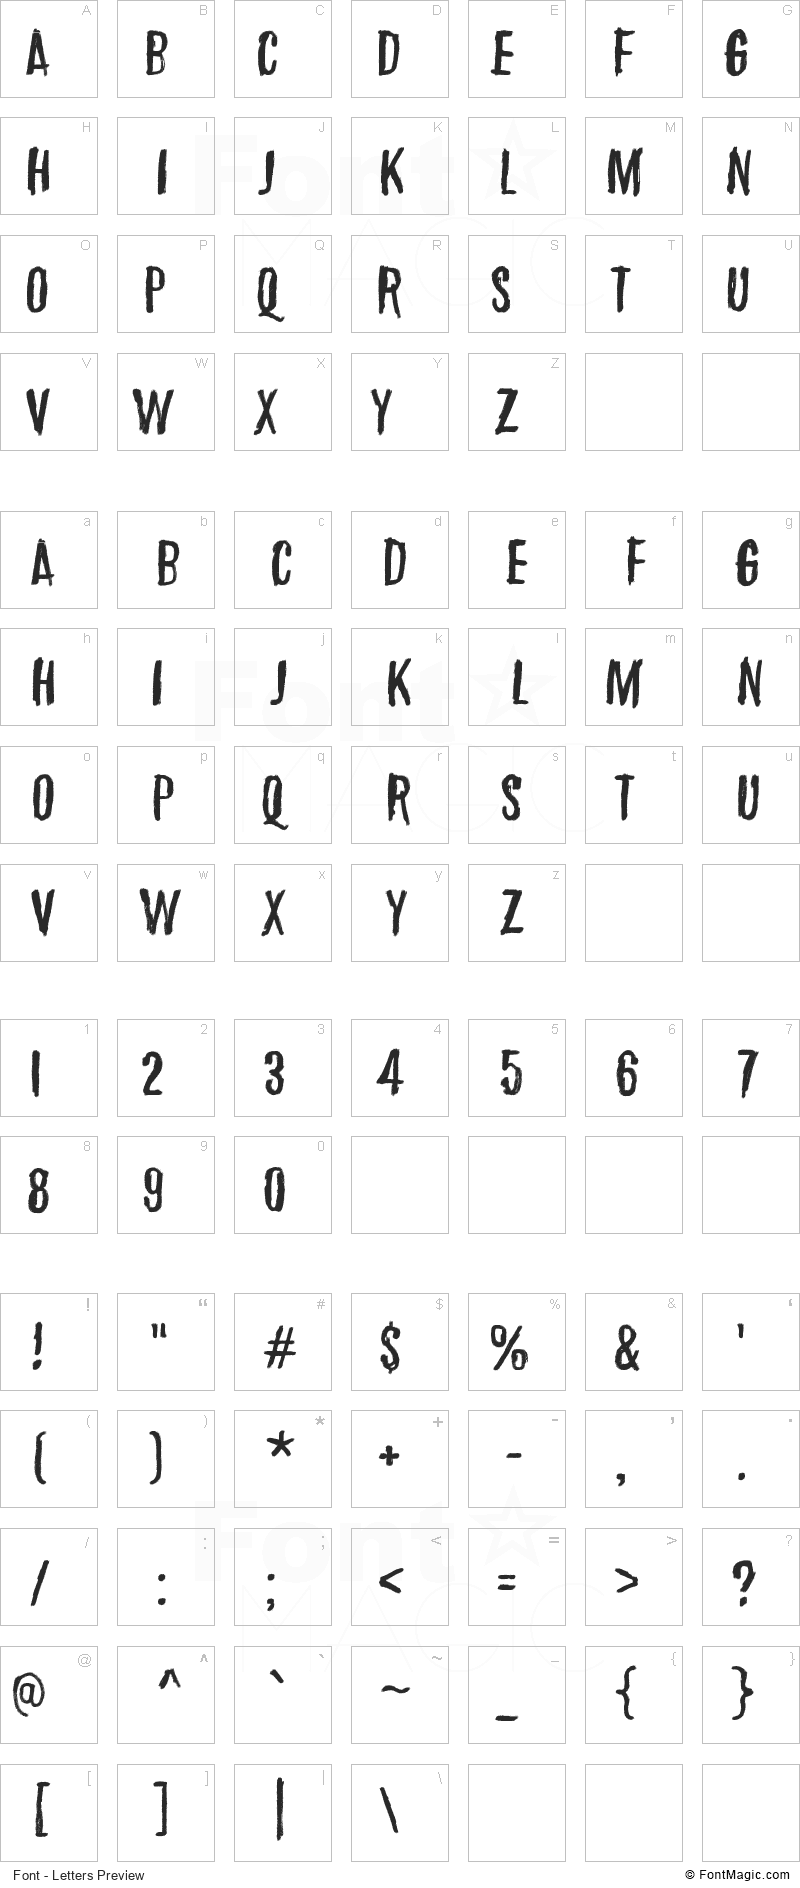 March of the pigs Font - All Latters Preview Chart